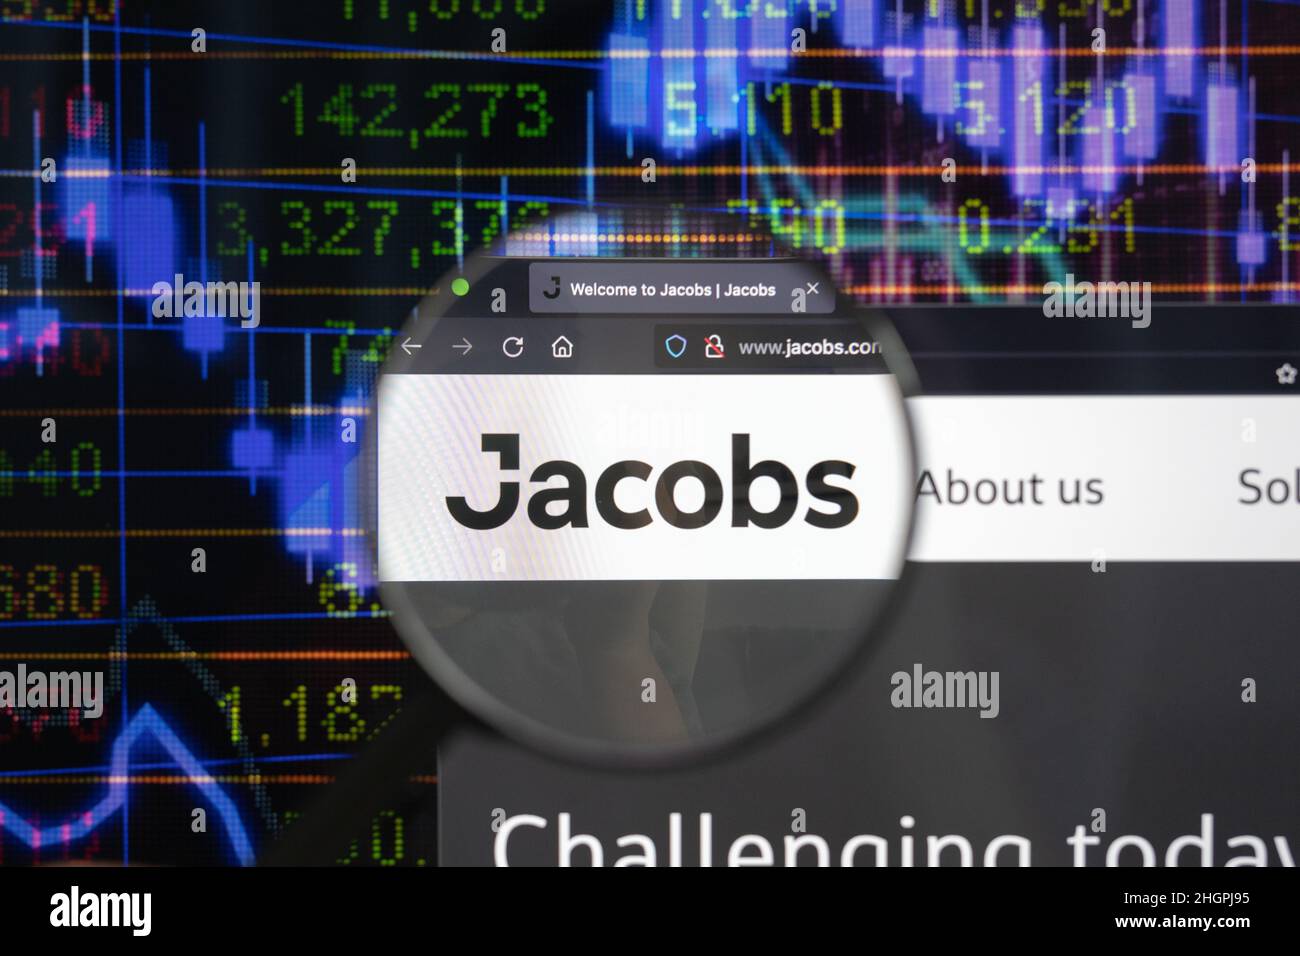 Jacobs company logo on a website with blurry stock market developments in the background, seen on a computer screen through a magnifying glass. Stock Photo